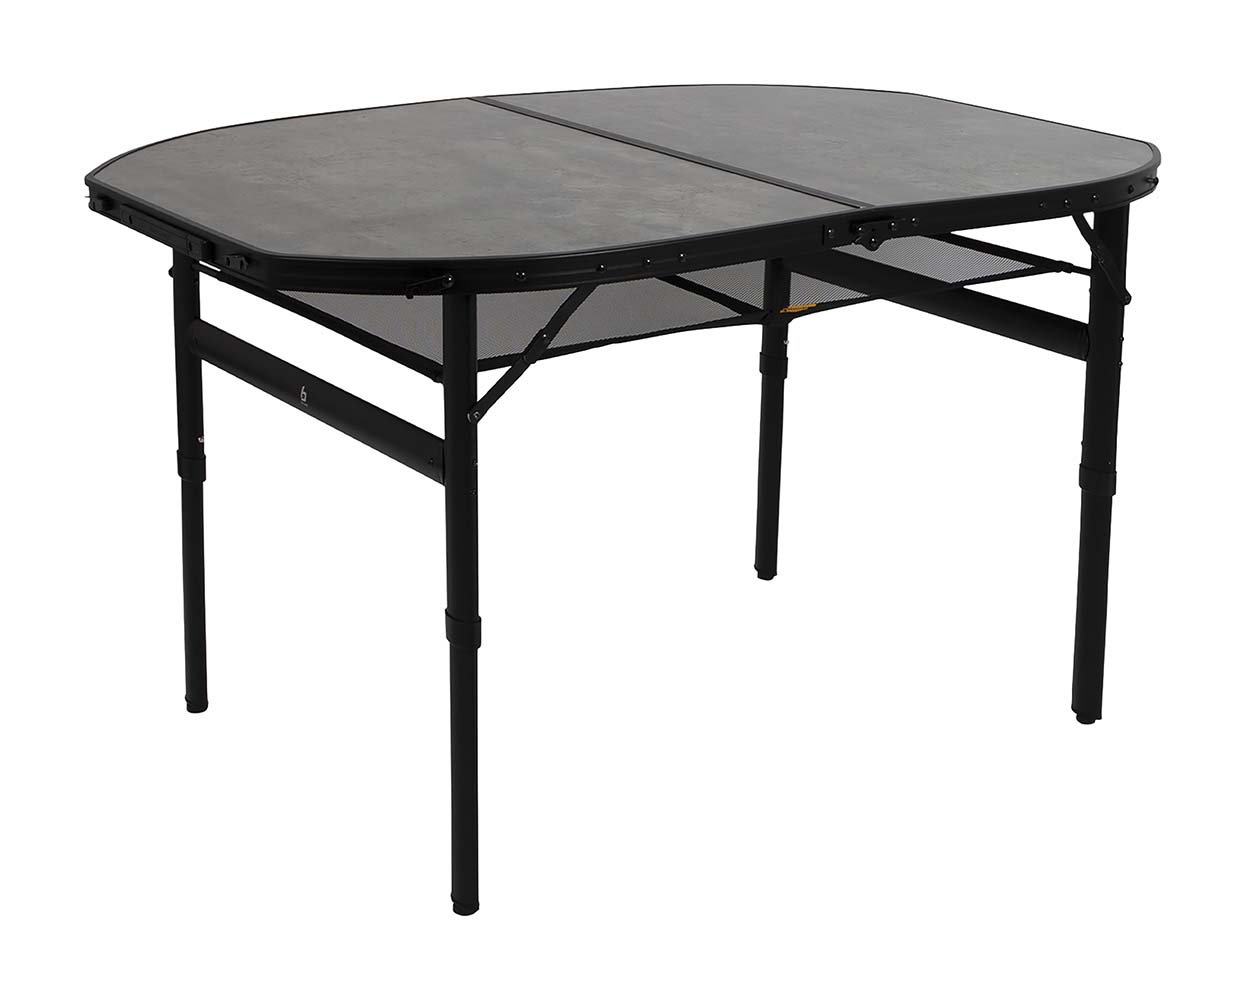 1404187 Bo-Camp - Industrial collection - Tafel - Northgate - Ovaal - Koffermodel - 120x80 cm